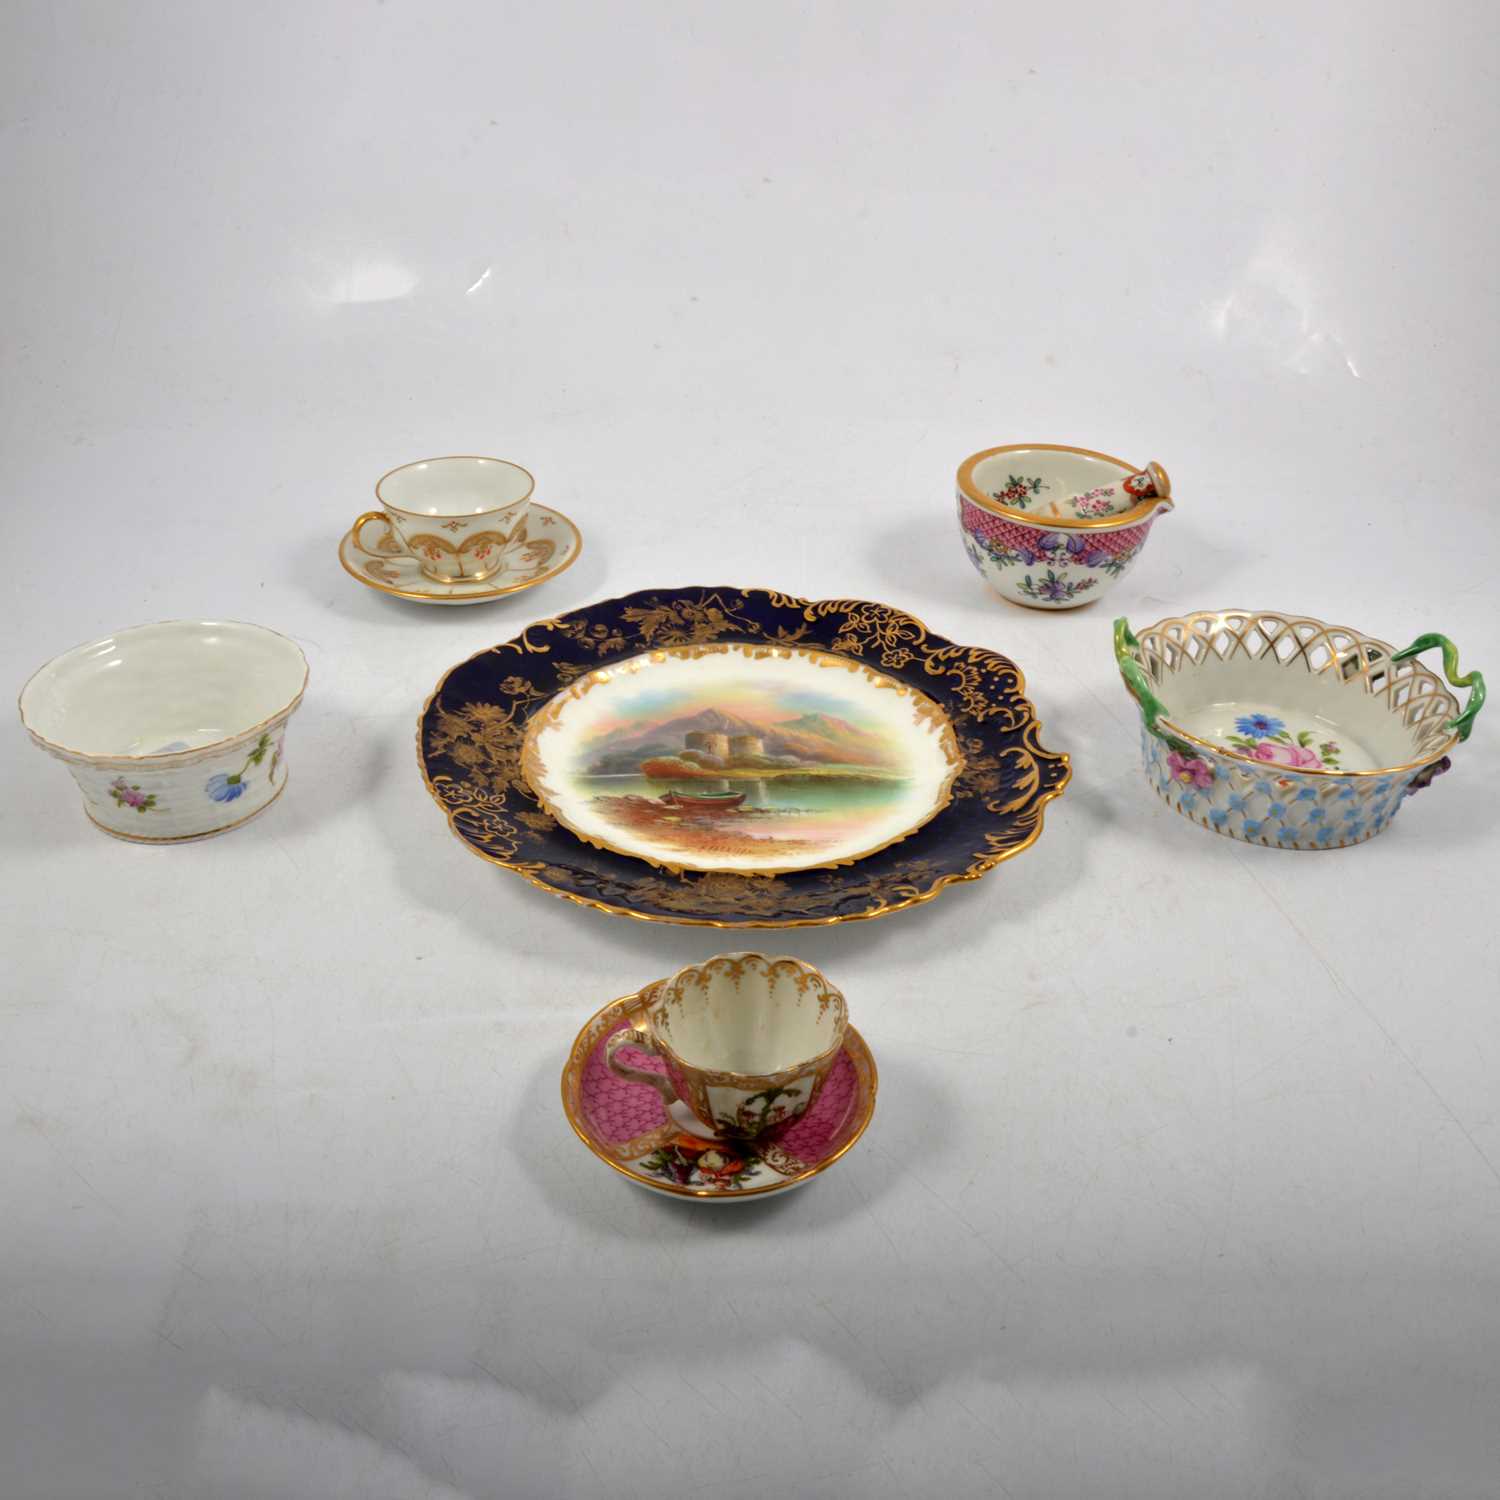 Lot 90 - Dresden twin-handled basket, small Dresden bowl, and other decorative ceramics.